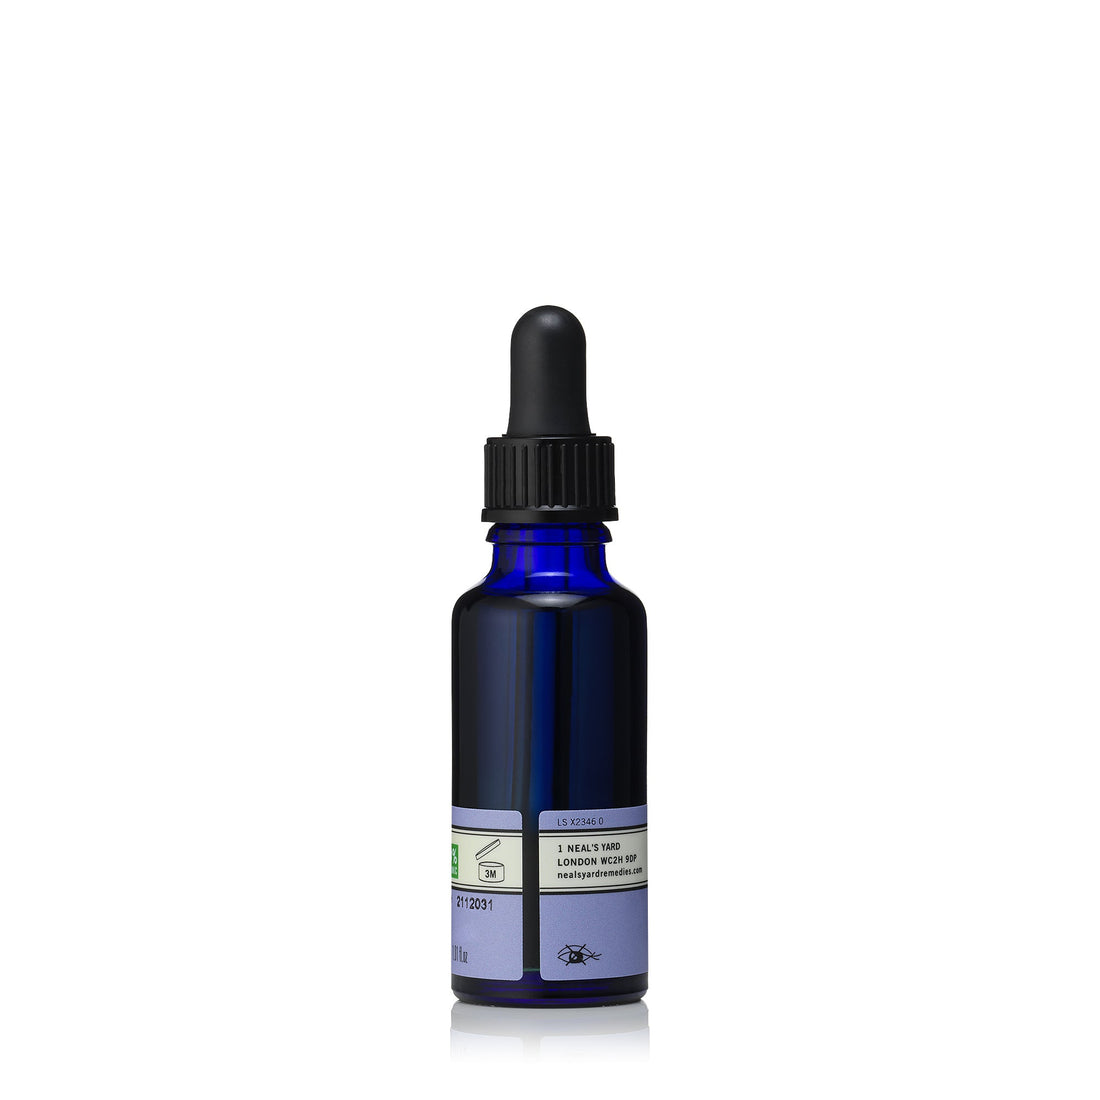 Rehydrating Rose Facial Oil 30ml (BBE 10/24)